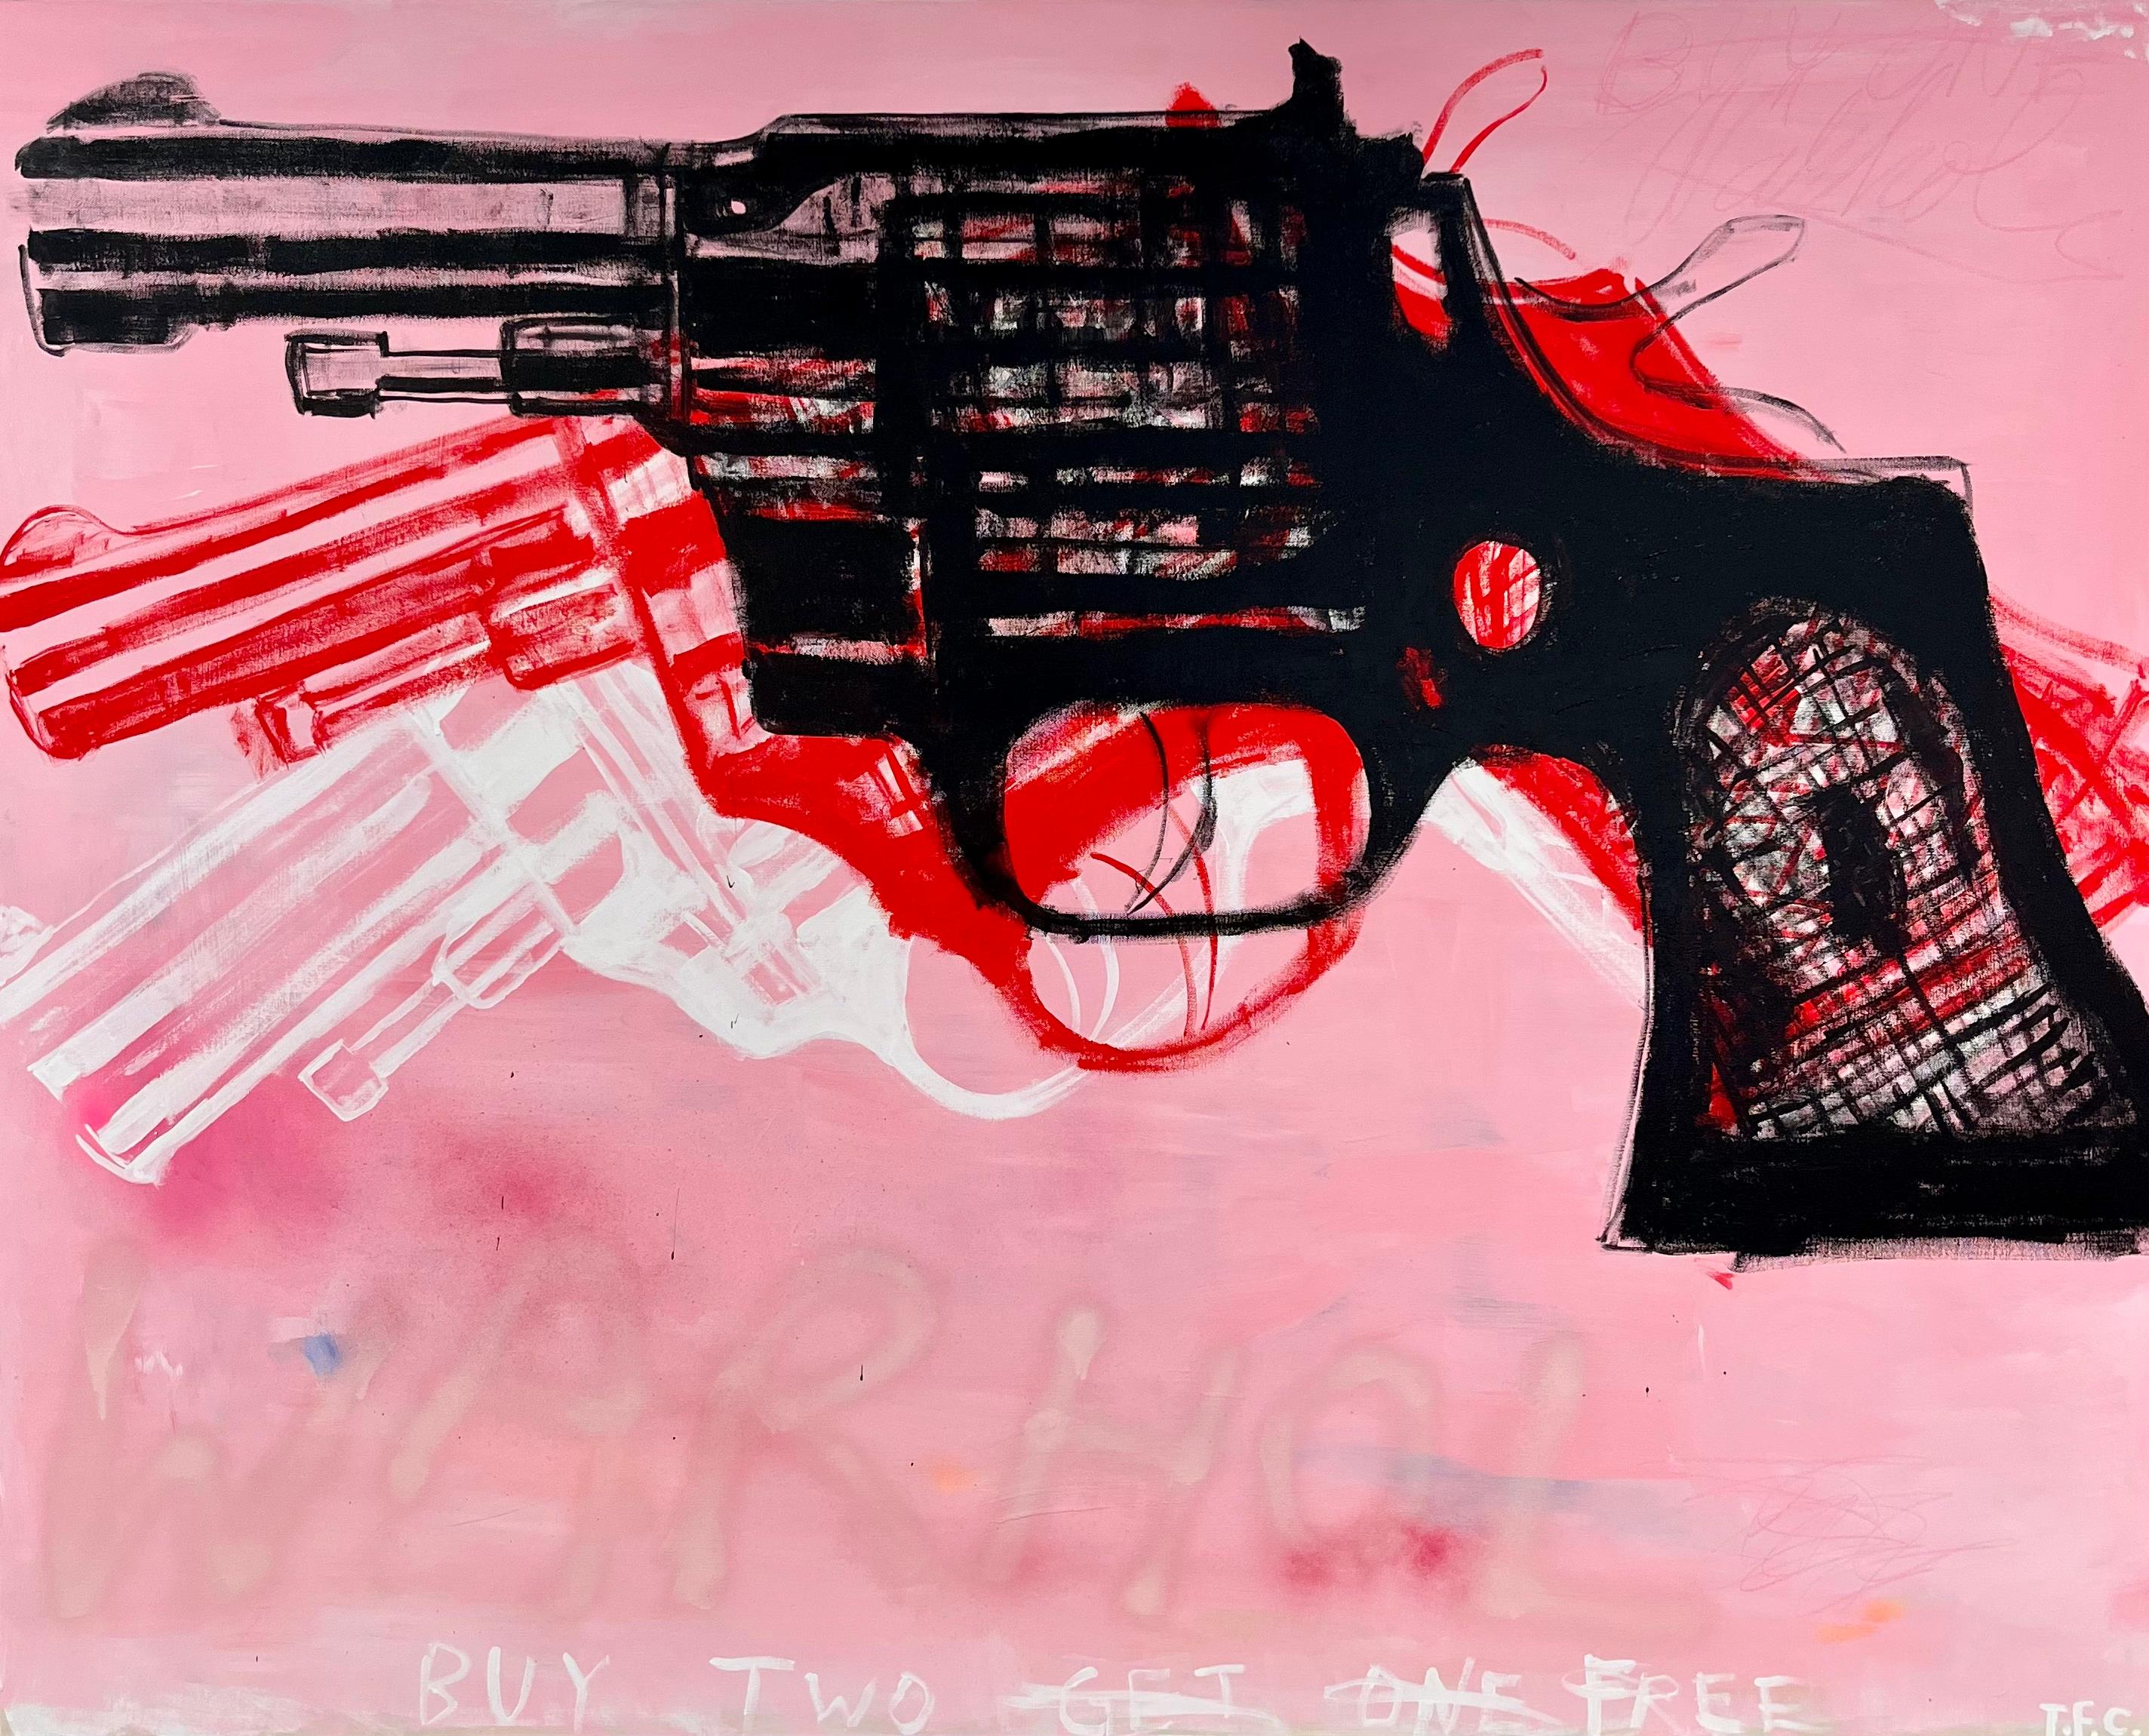 Tyler Casey Abstract Painting - "Guns (Pink)" Contemporary Abstract Andy Warhol Inspired Pop Art Painting